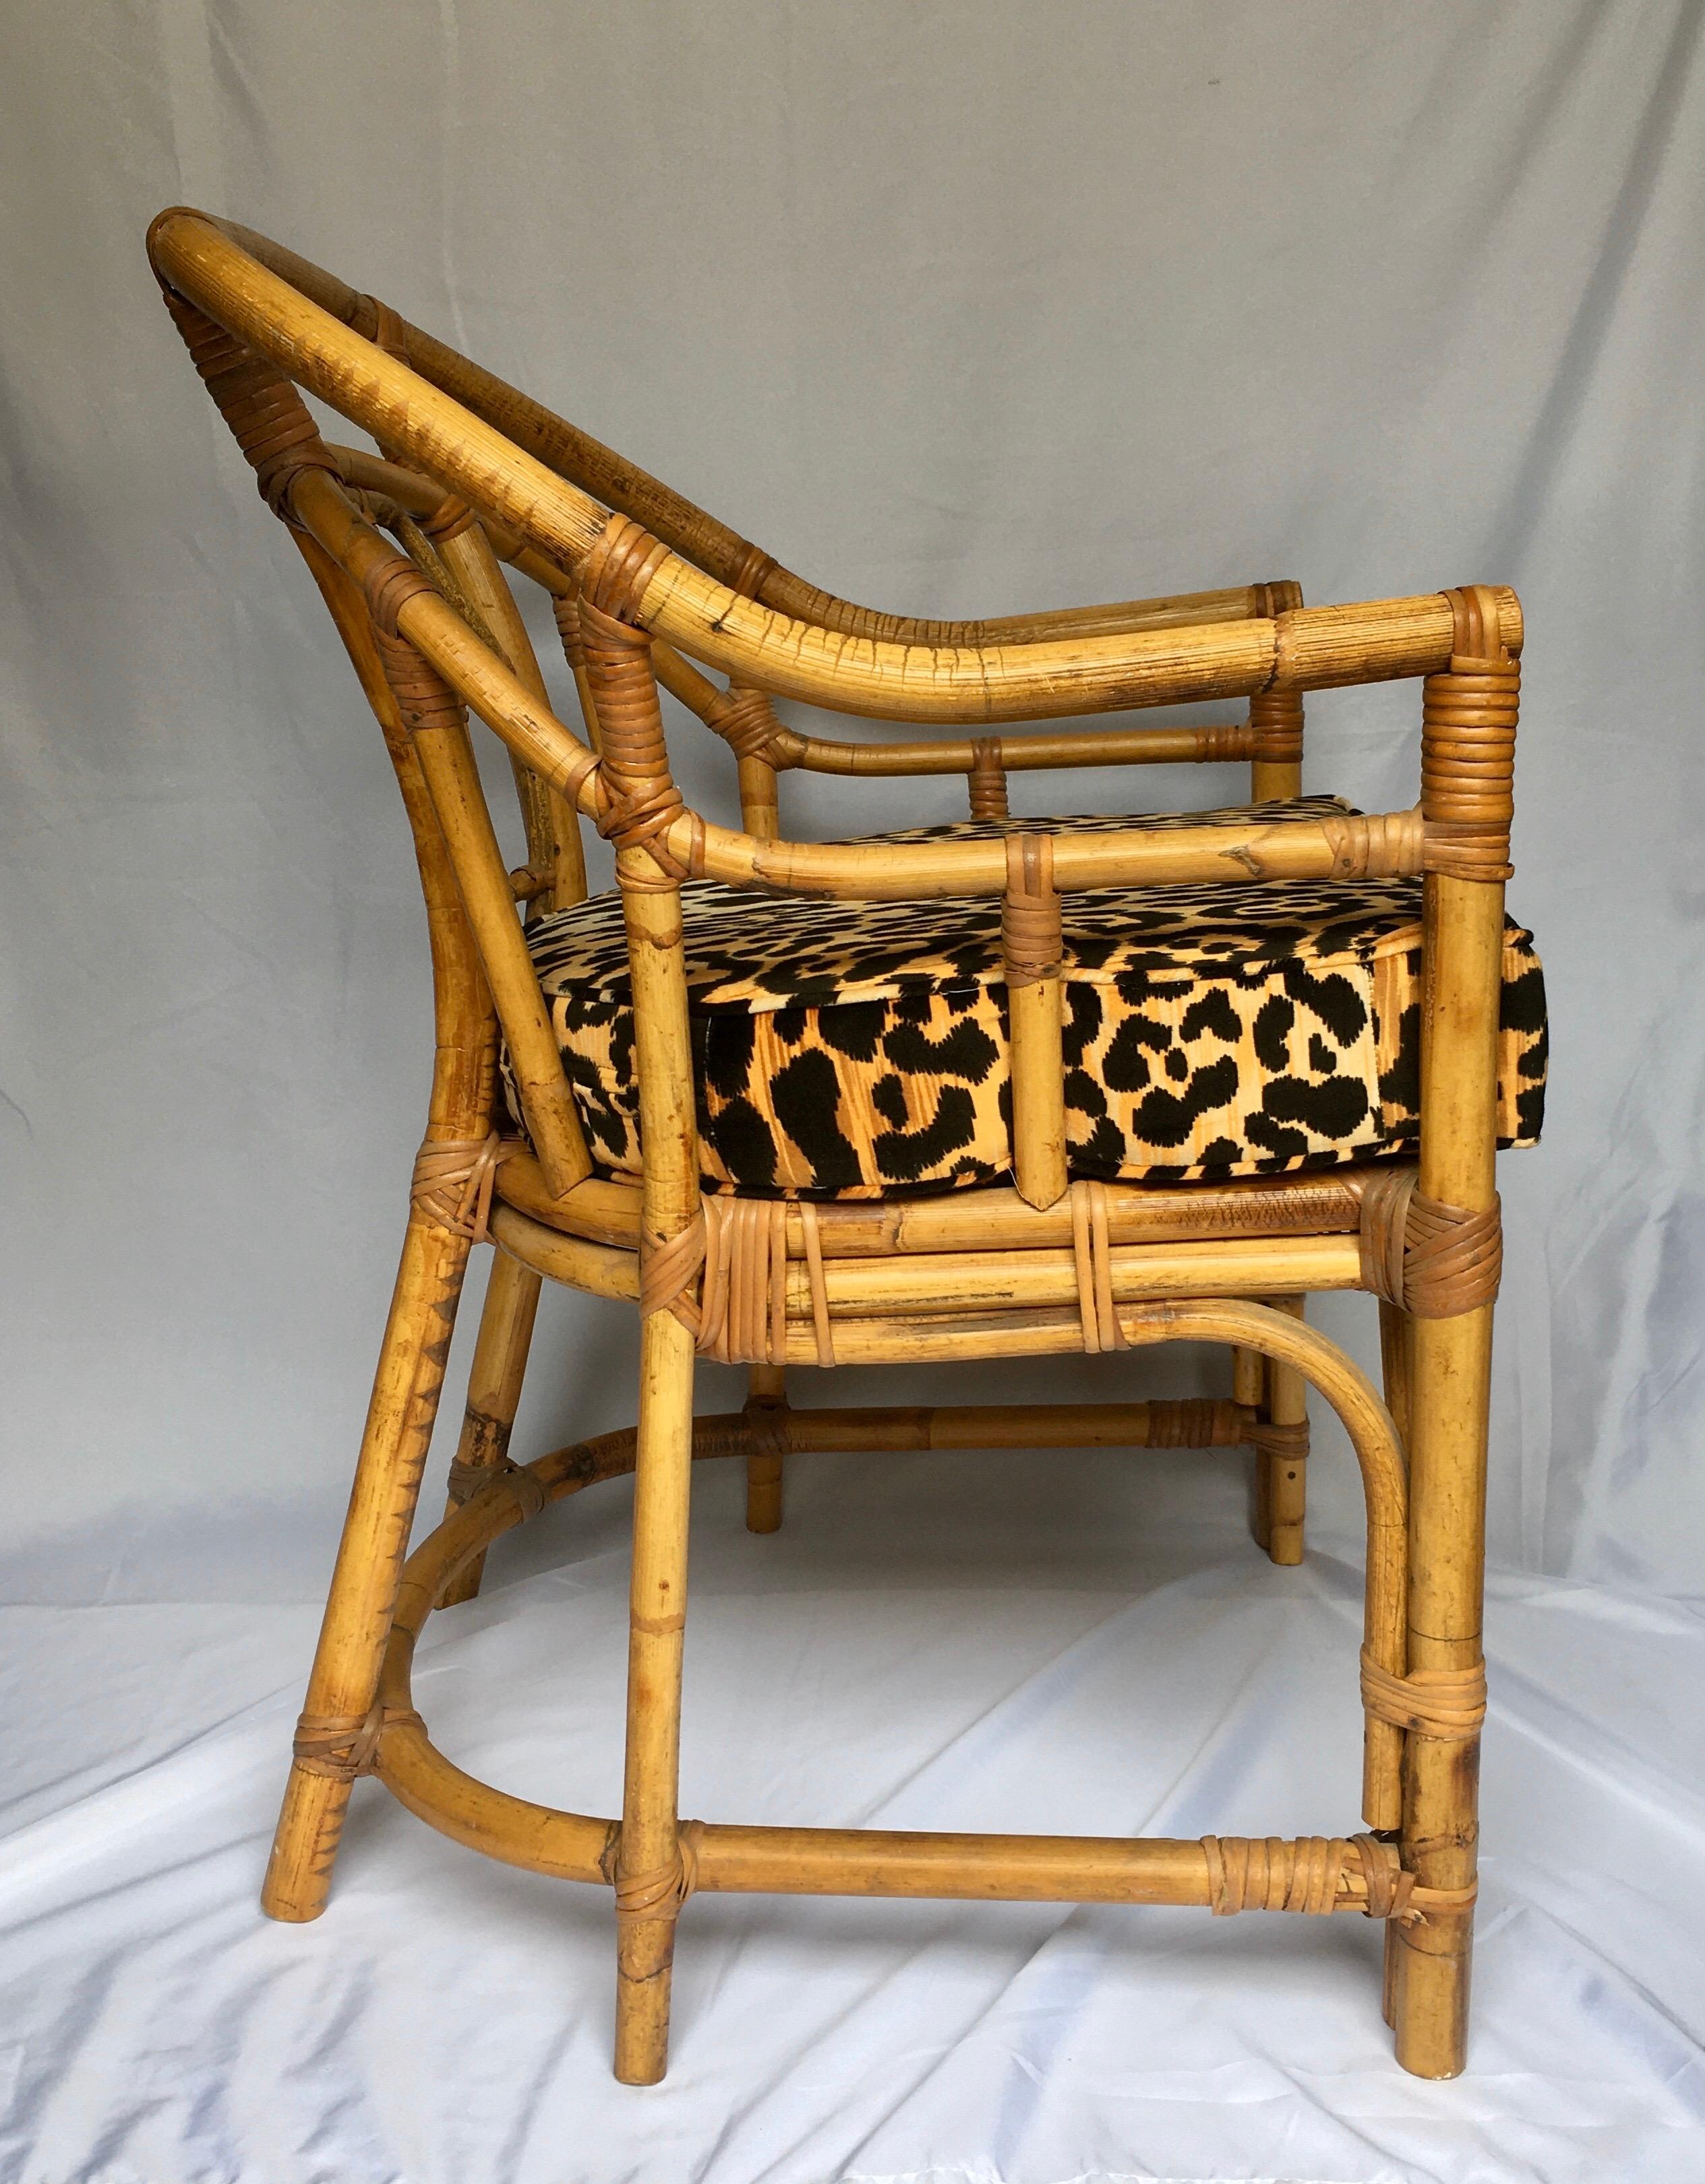 Midcentury Chinese Chippendale Brighton Pavilion style natural bamboo armchair. This chinoiserie style accent arm chair features a geometric fretwork design back and new custom animal print cotton velvet seat cushion. Would also make a beautiful